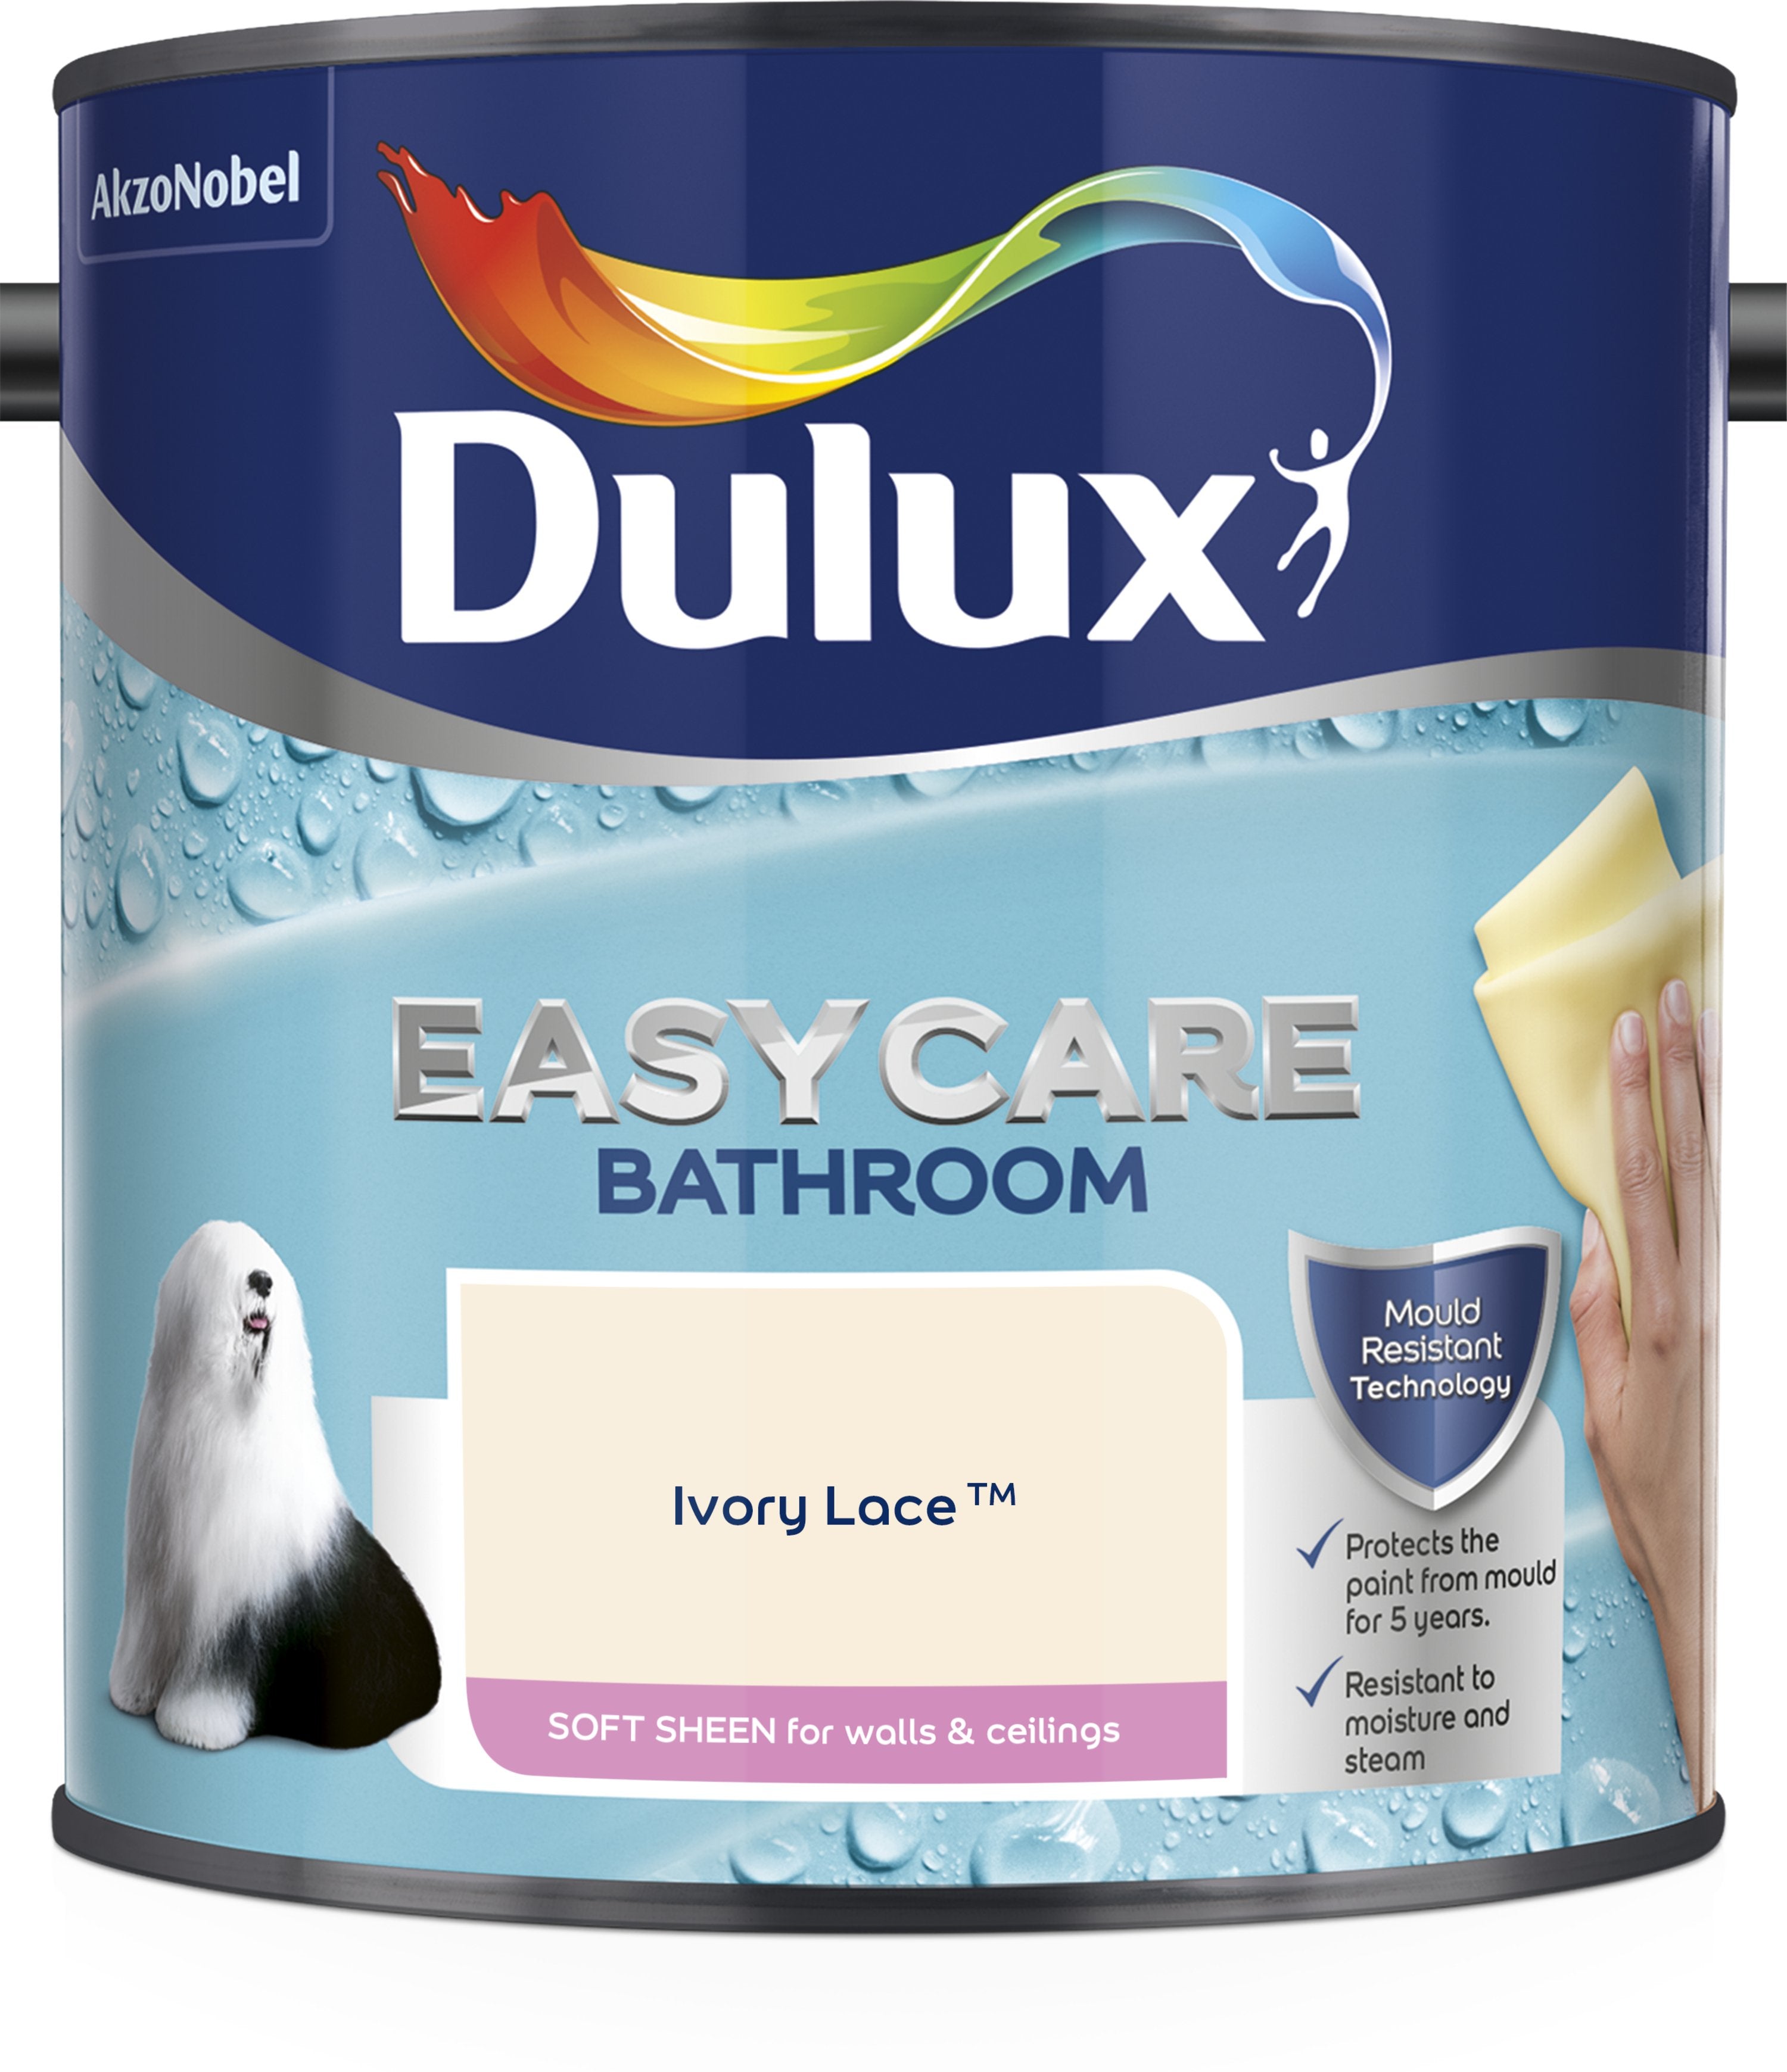 Dulux-Easycare-Bathroom-Soft-Sheen-Emulsion-Paint-For-Walls-And-Ceilings-Ivory-Lace-2.5L